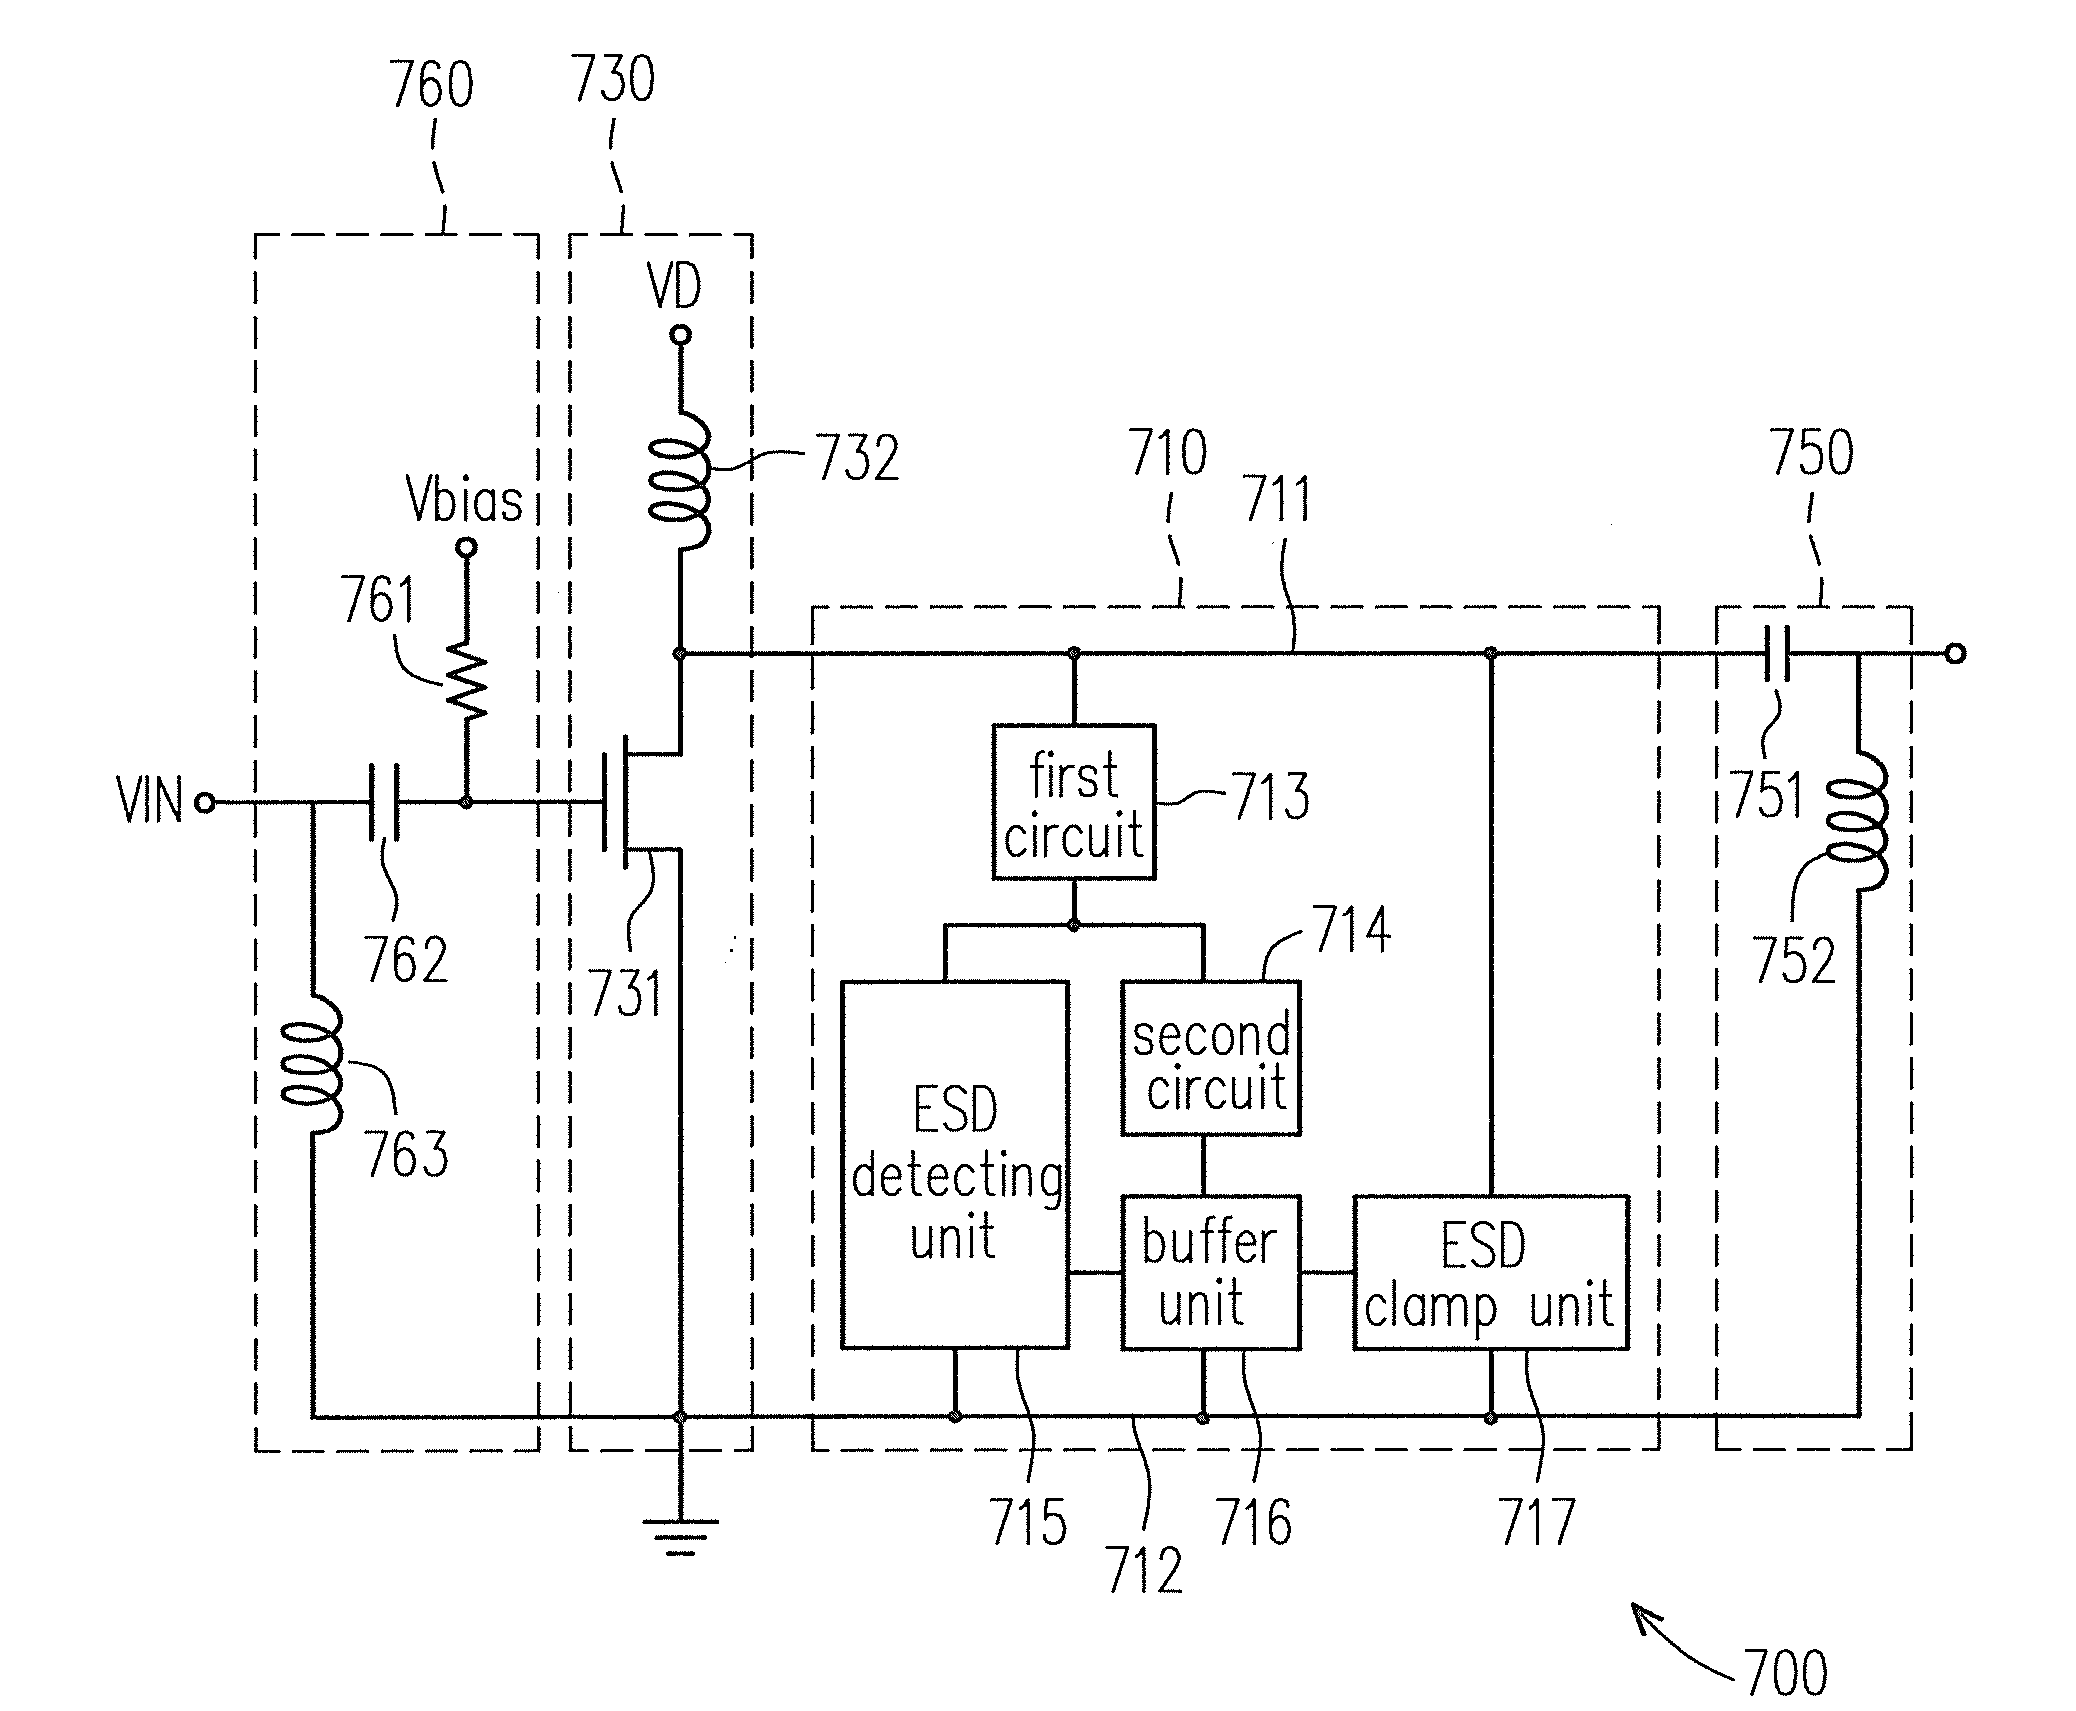 ESD clamp circuit applied to power amplifier